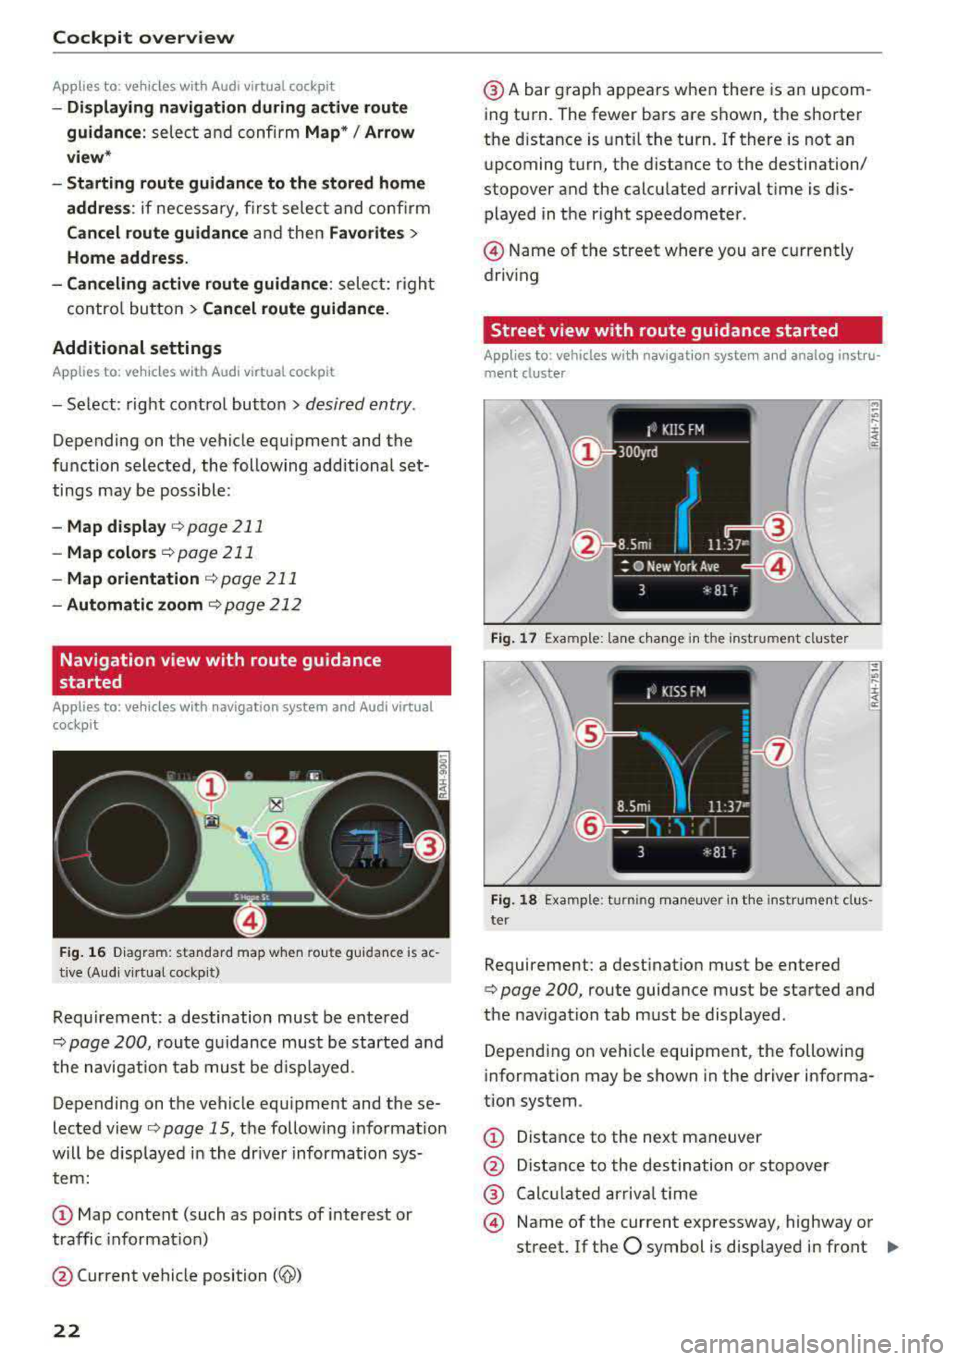 AUDI A3 SEDAN 2017  Owners Manual Cockpit  overview 
App lies  to: vehicles  w ith  Audi virtual  cockpit 
-Di splaying  navigation  during  active  route 
guidance : 
select and confirm Map* / Arrow 
view * 
-Starting  route  guidanc